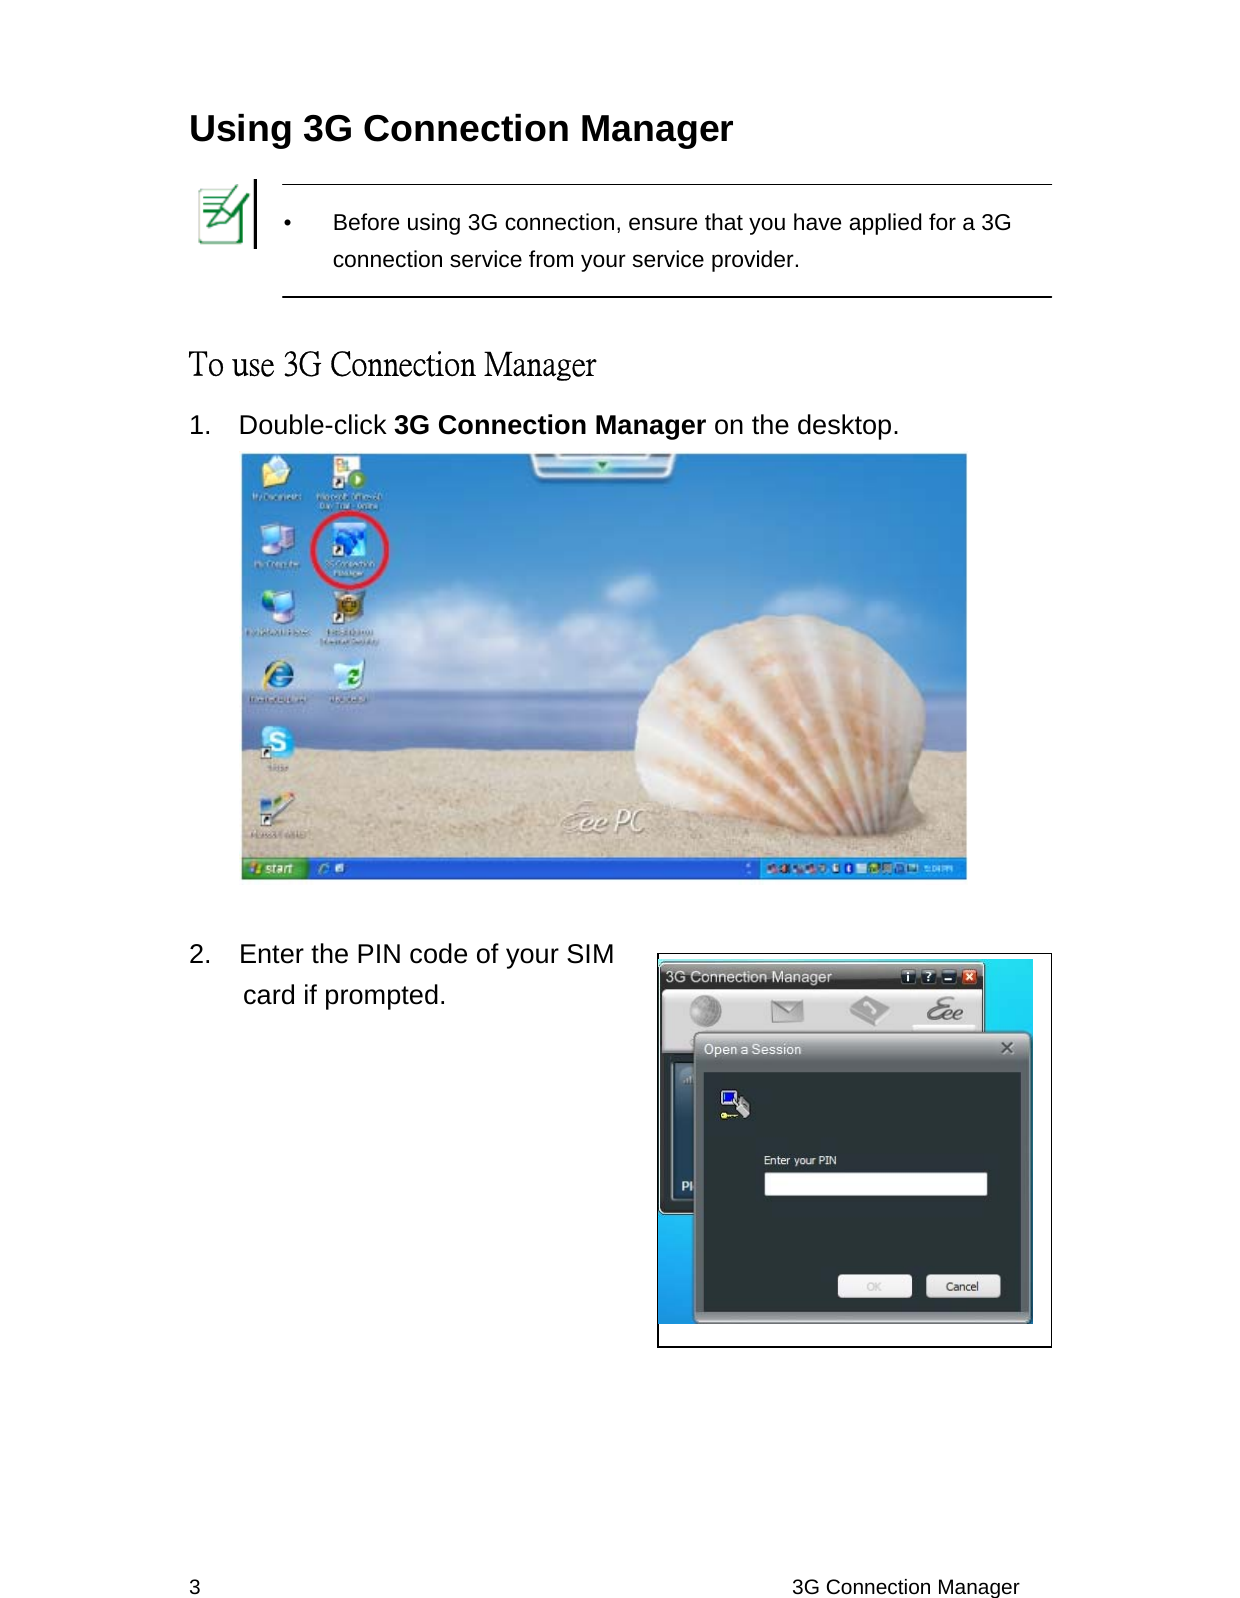 Using 3G Connection Manager    To use 3G Connection Manager 1.  Double-click 3G Connection Manager on the desktop.   3                                                         3G Connection Manager 2.  Enter the PIN code of your SIM   card if prompted.                    Before using 3G connection, ensure that you have applied for a 3G connection service from your service provider. 